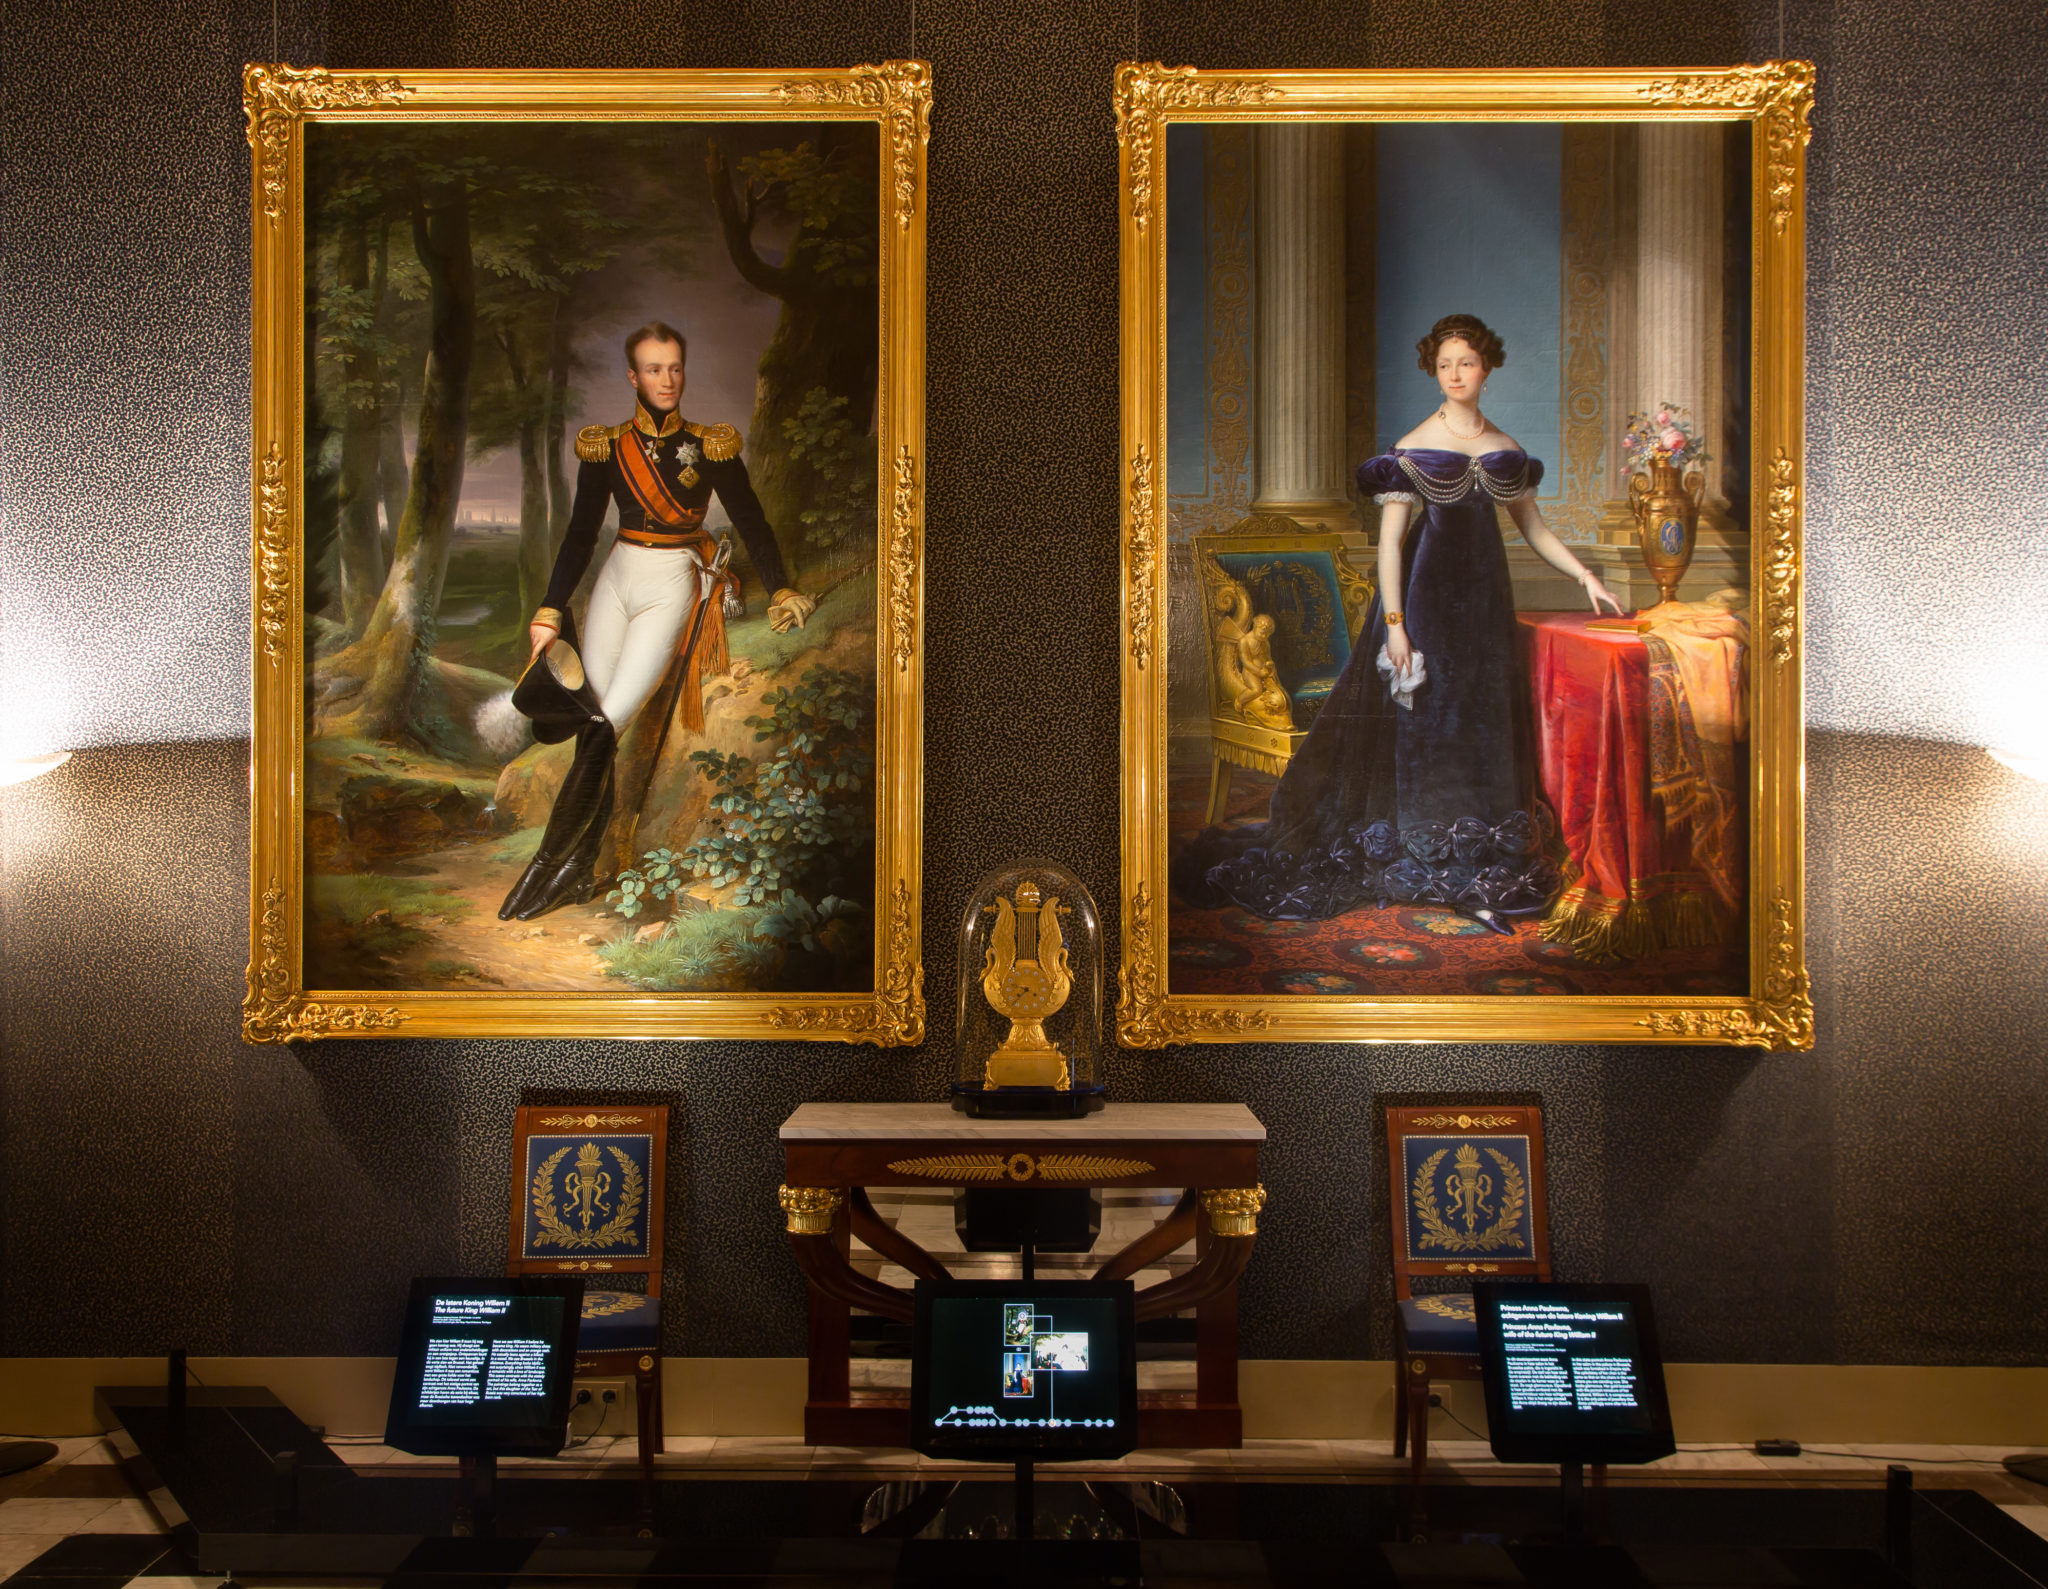 Royal portraits at the Dam Palace in Amsterdam